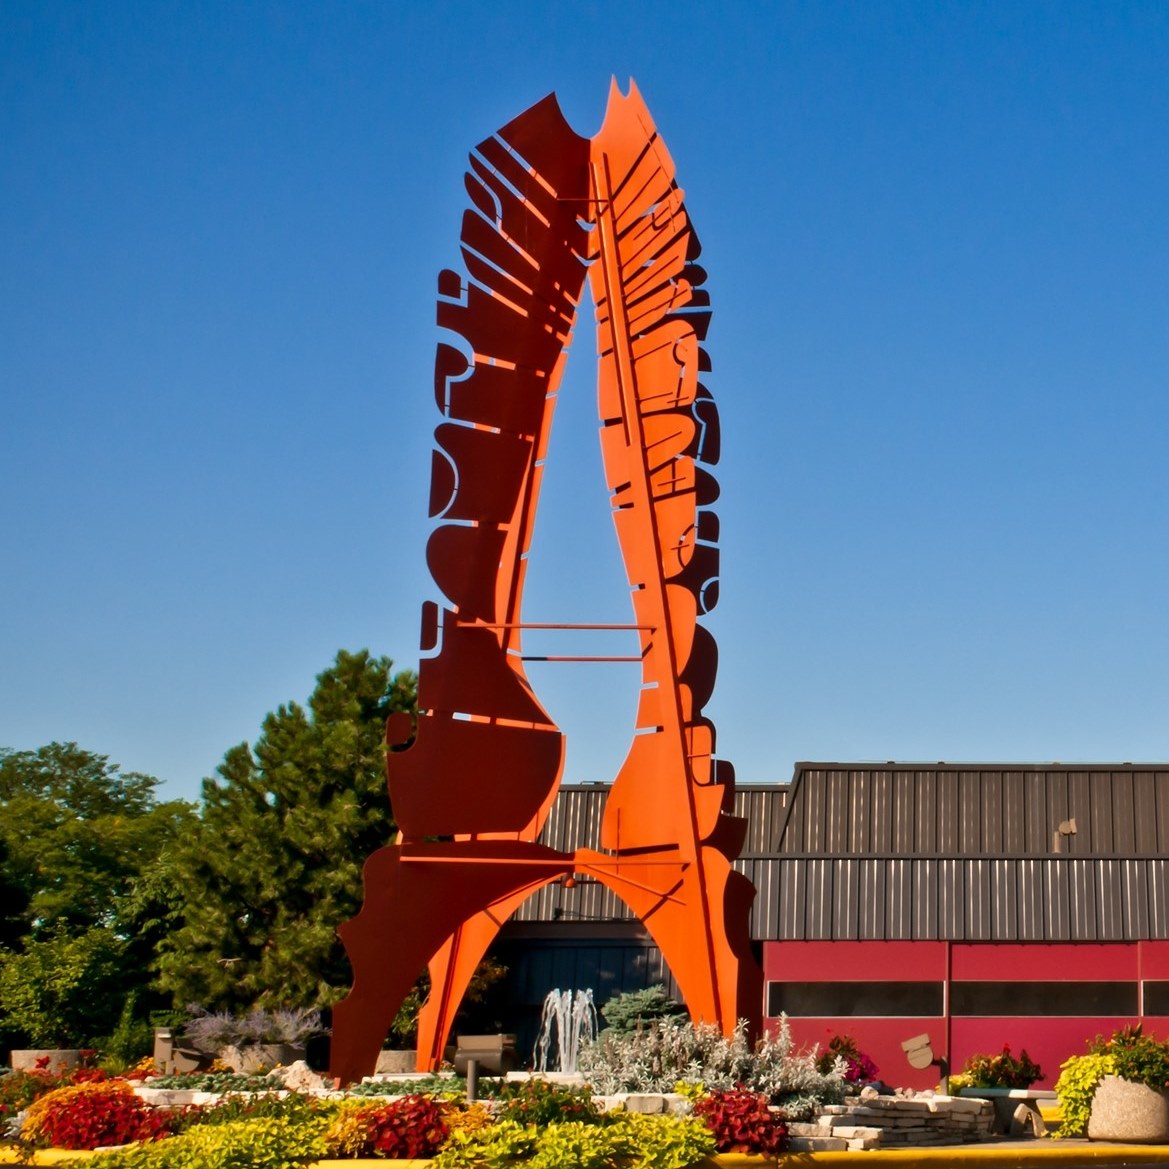 Fireside Theatre sculpture, tall and orange